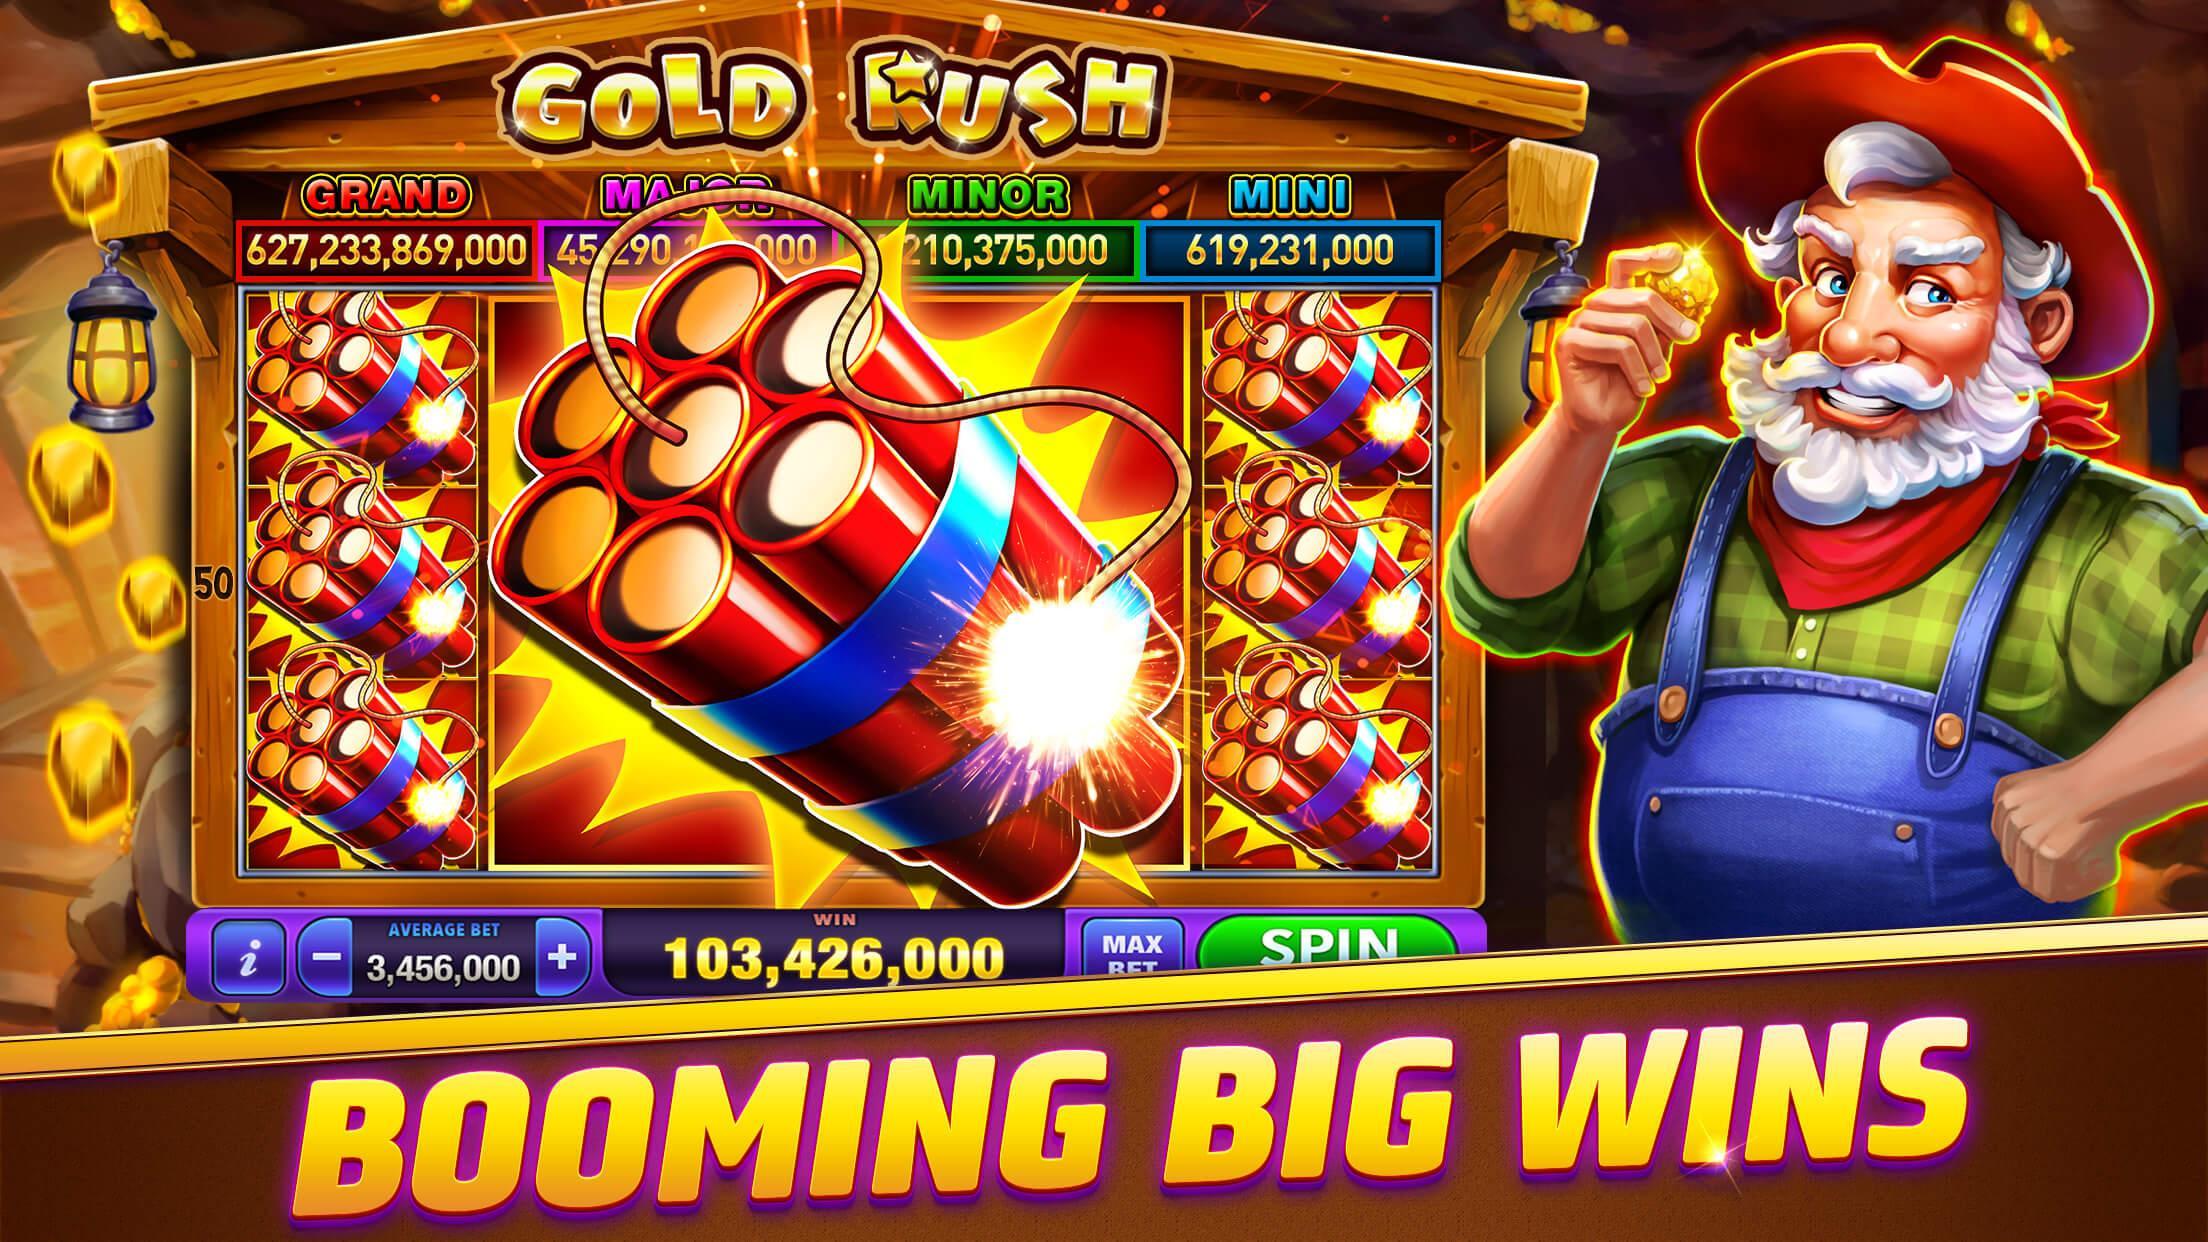 What are the best free slot games